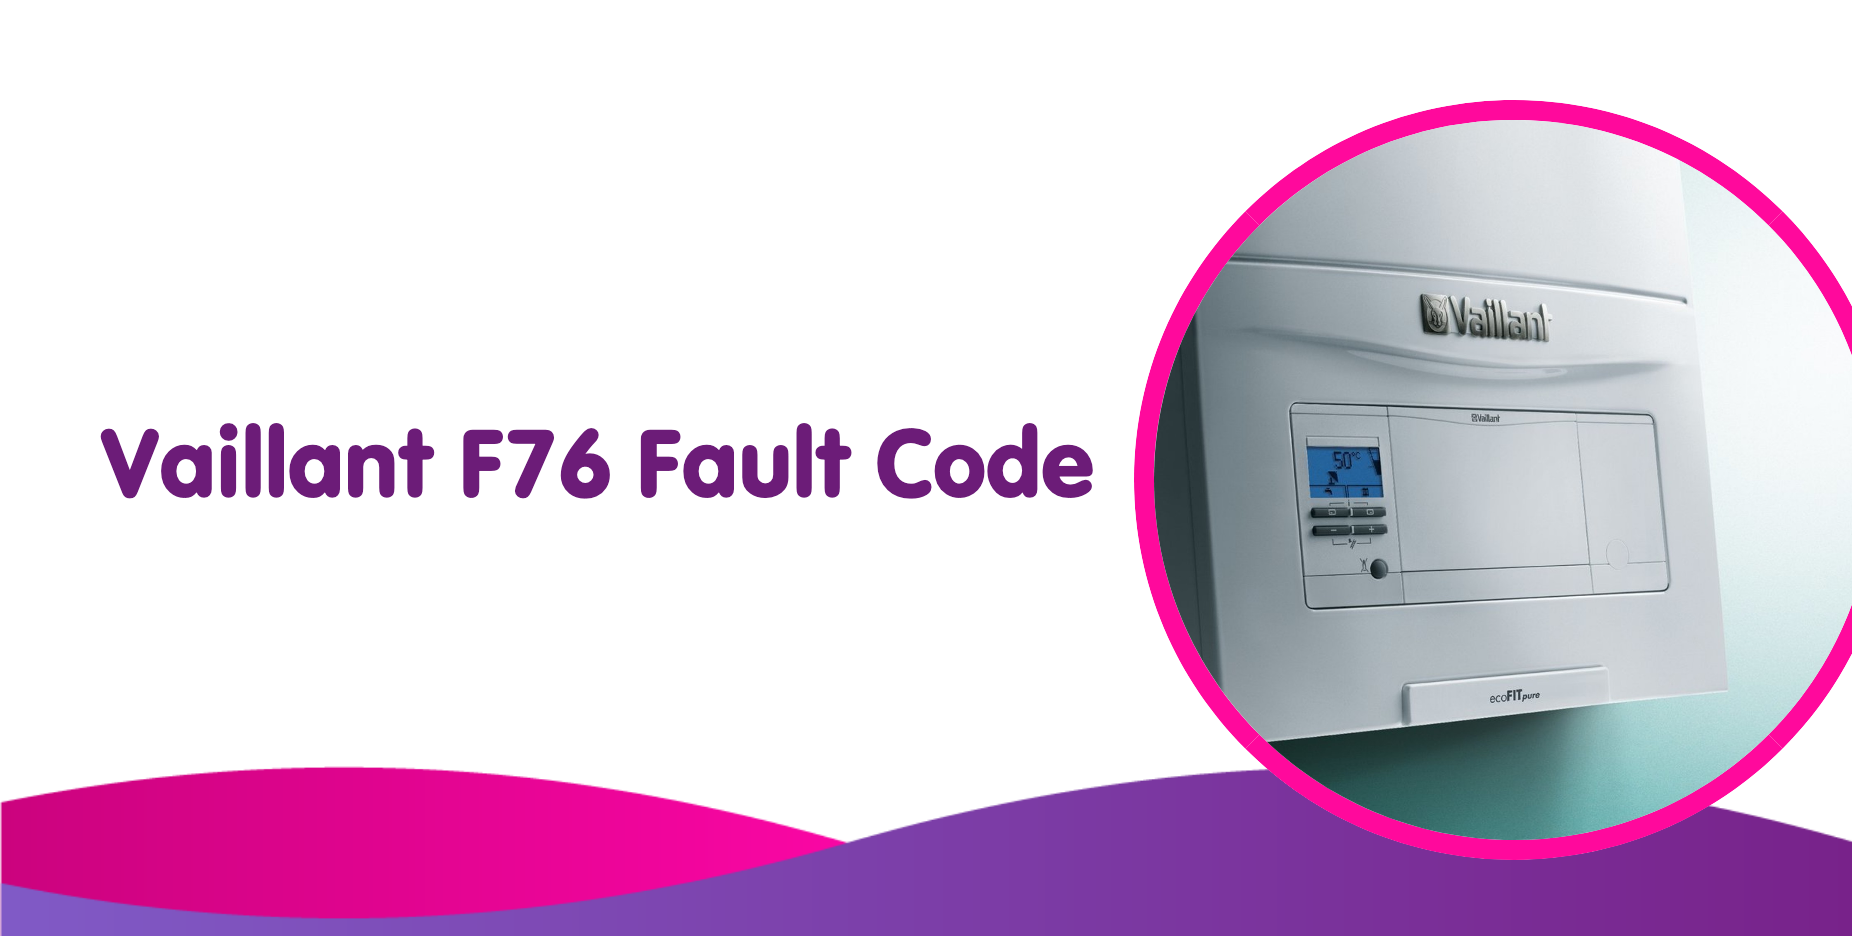 Vaillant F76 Fault Code Meaning, Causes & How To Fix